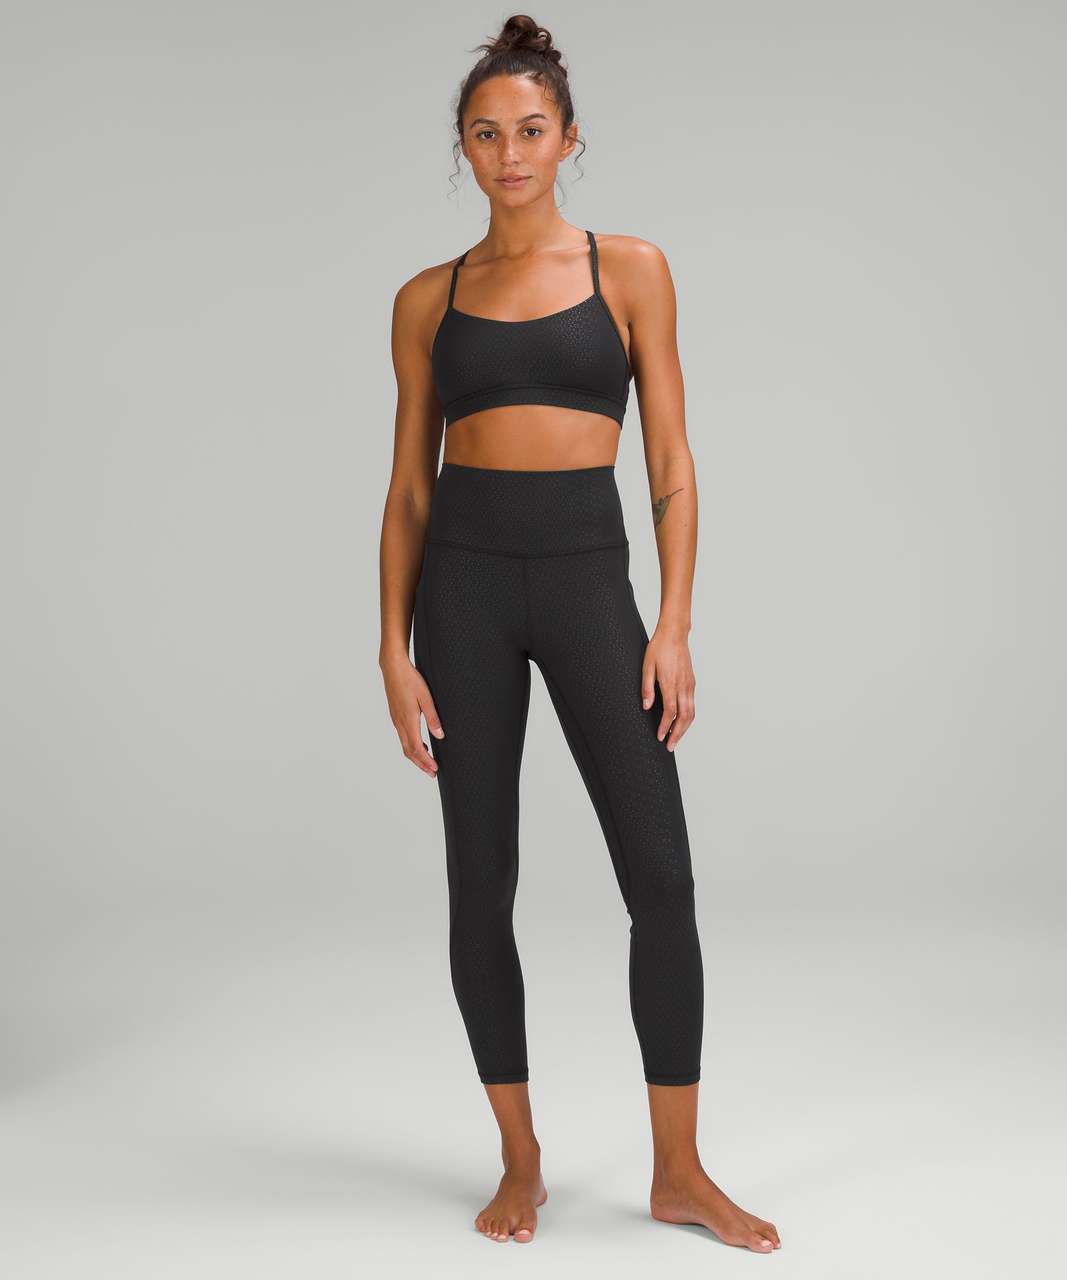 A GEC educator says that most bras will no longer come with padding to  reduce their carbon footprint. What does this subreddit think about that? :  r/lululemon